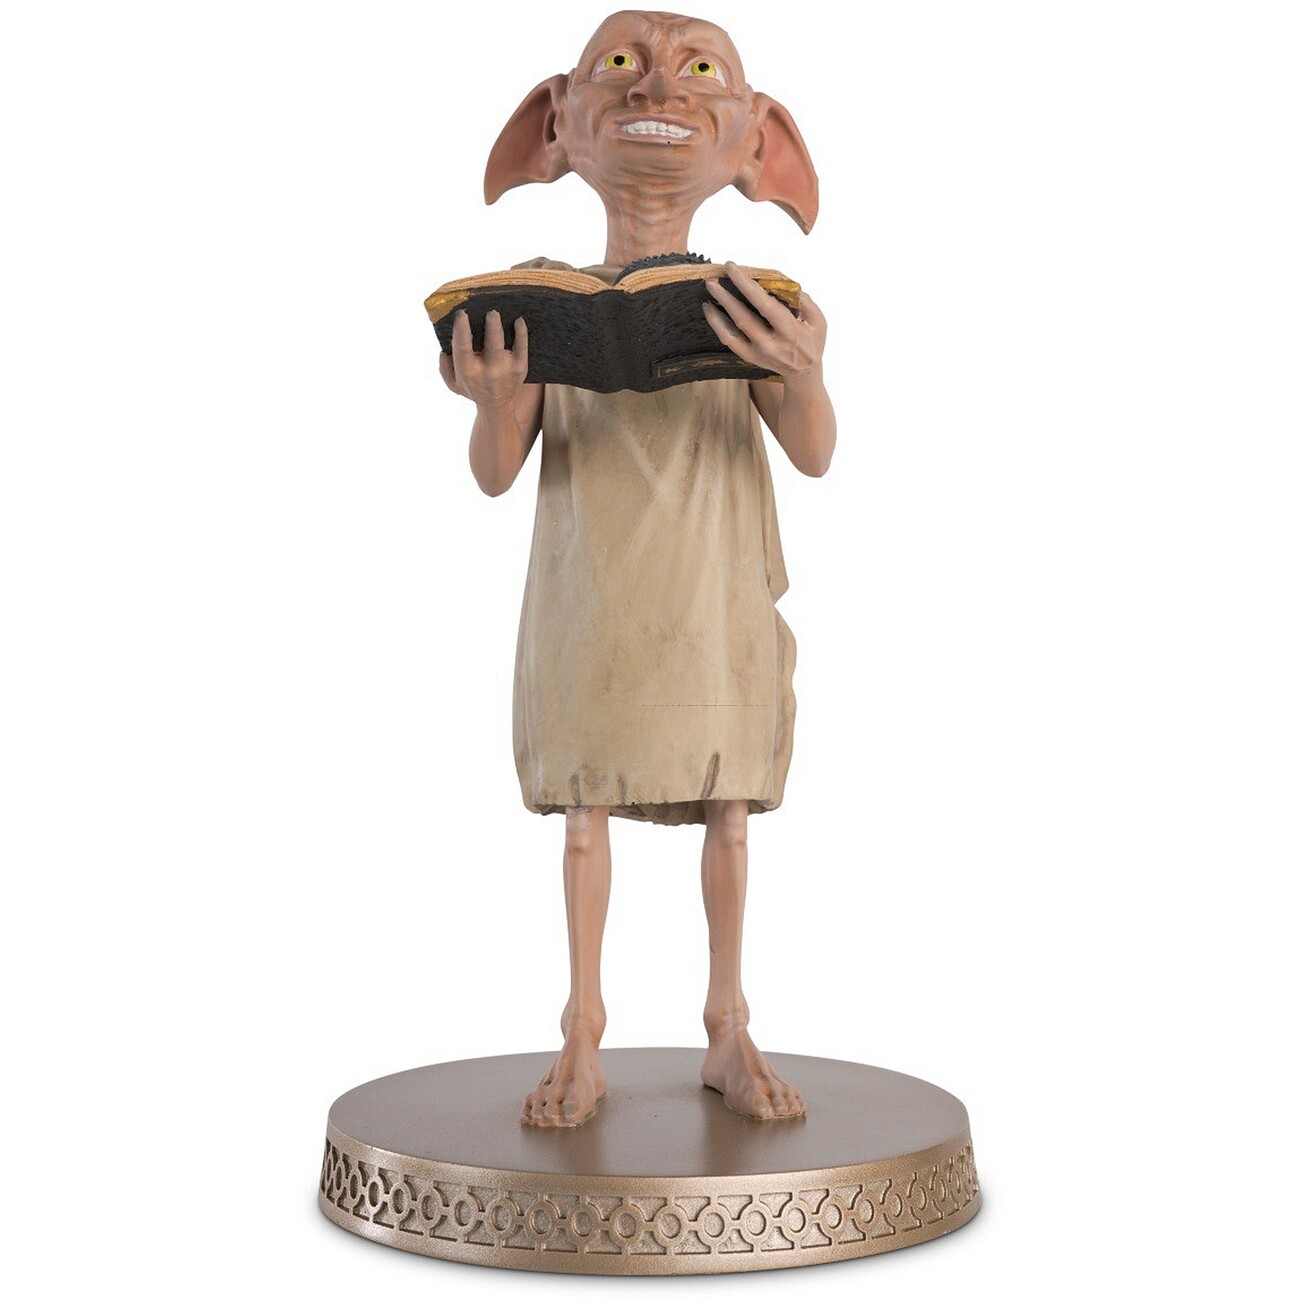 Figurine Harry Potter - Dobby | Tips for original gifts